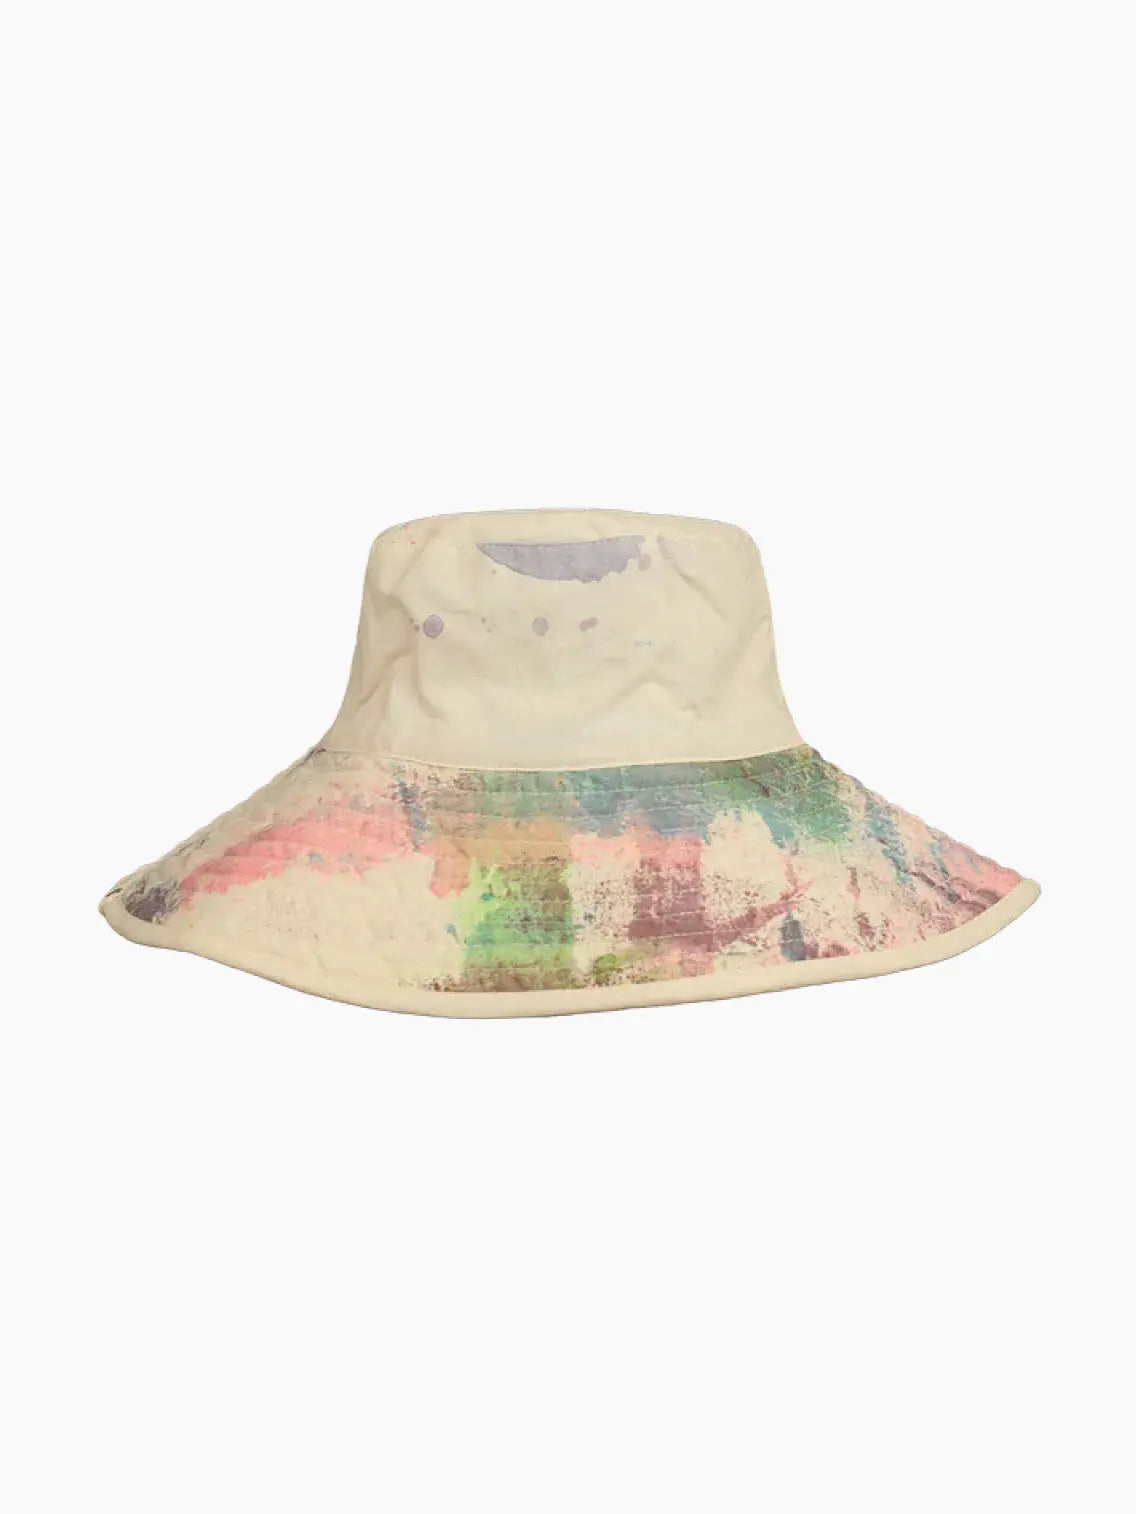 A Sheep Gran Bucket Hat from Romualda featuring a cream base color with a watercolor-like pattern in pastel shades of pink, green, purple, and blue. The design has an abstract, artistic feel, reflecting the vibrant spirit of Barcelona and giving the hat a unique and colorful appearance.